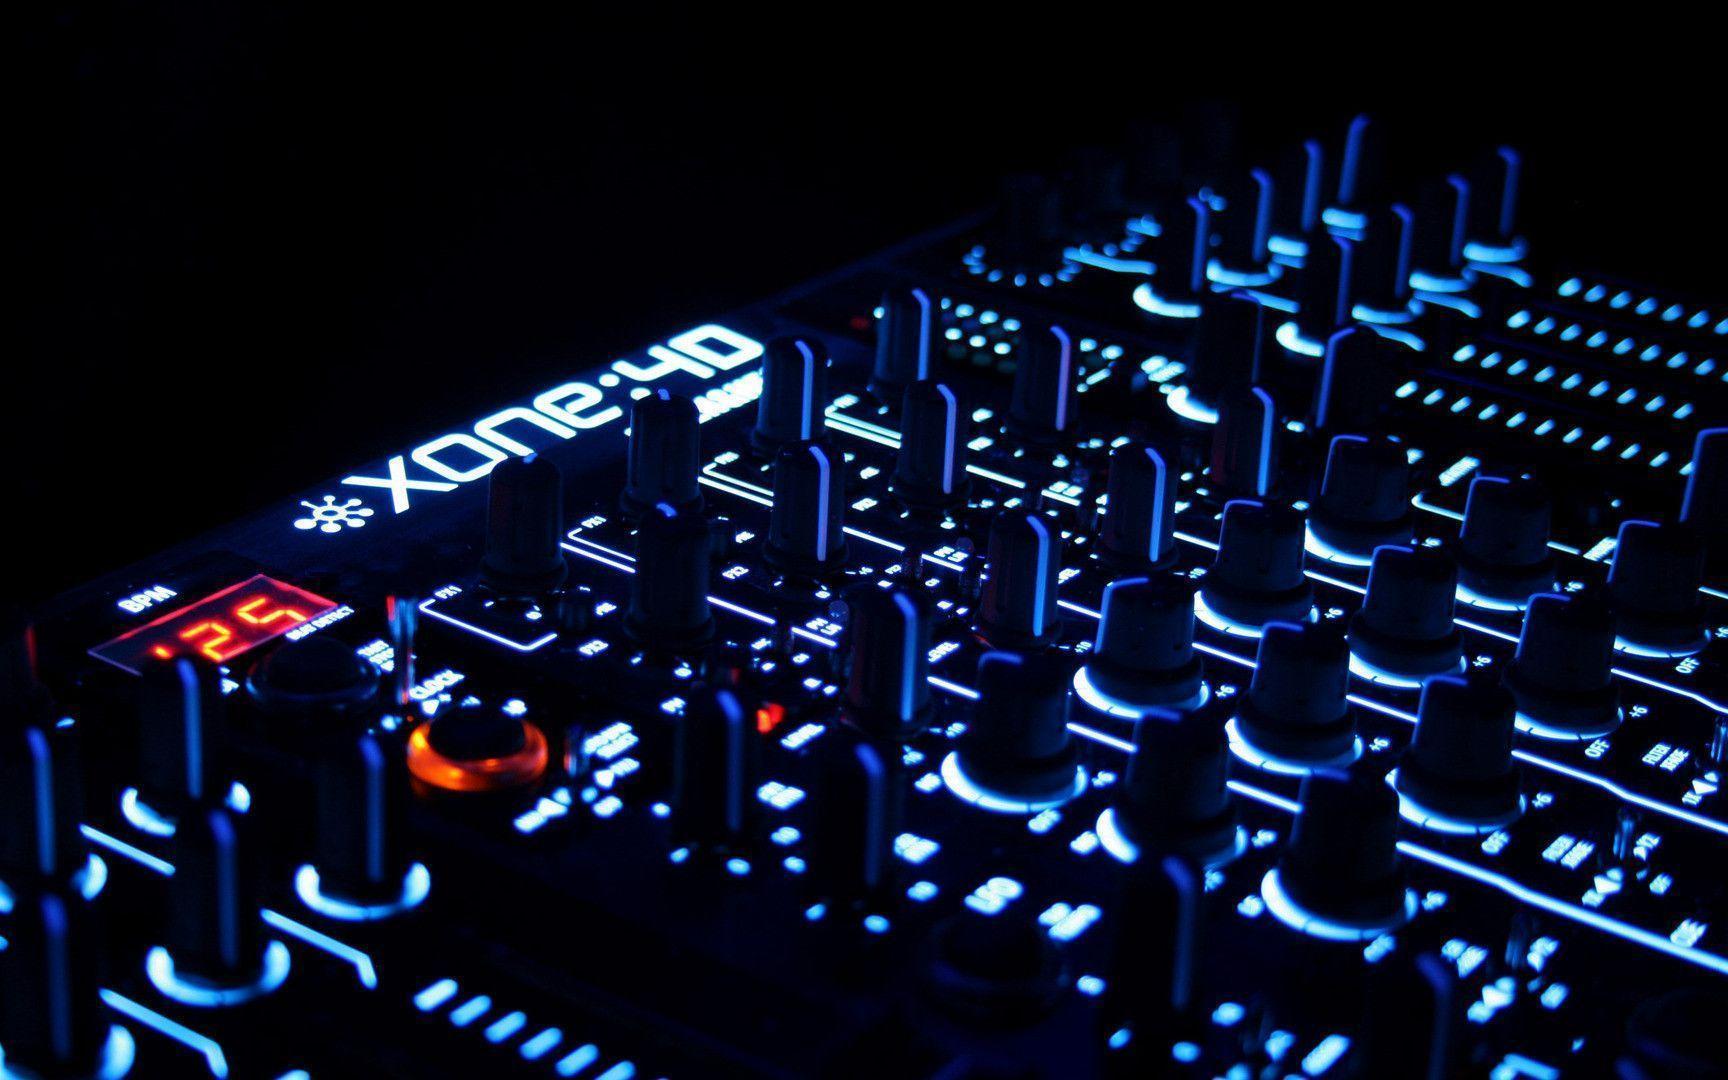 hd dj wallpaper for mac 8 - Image And Wallpaper free to